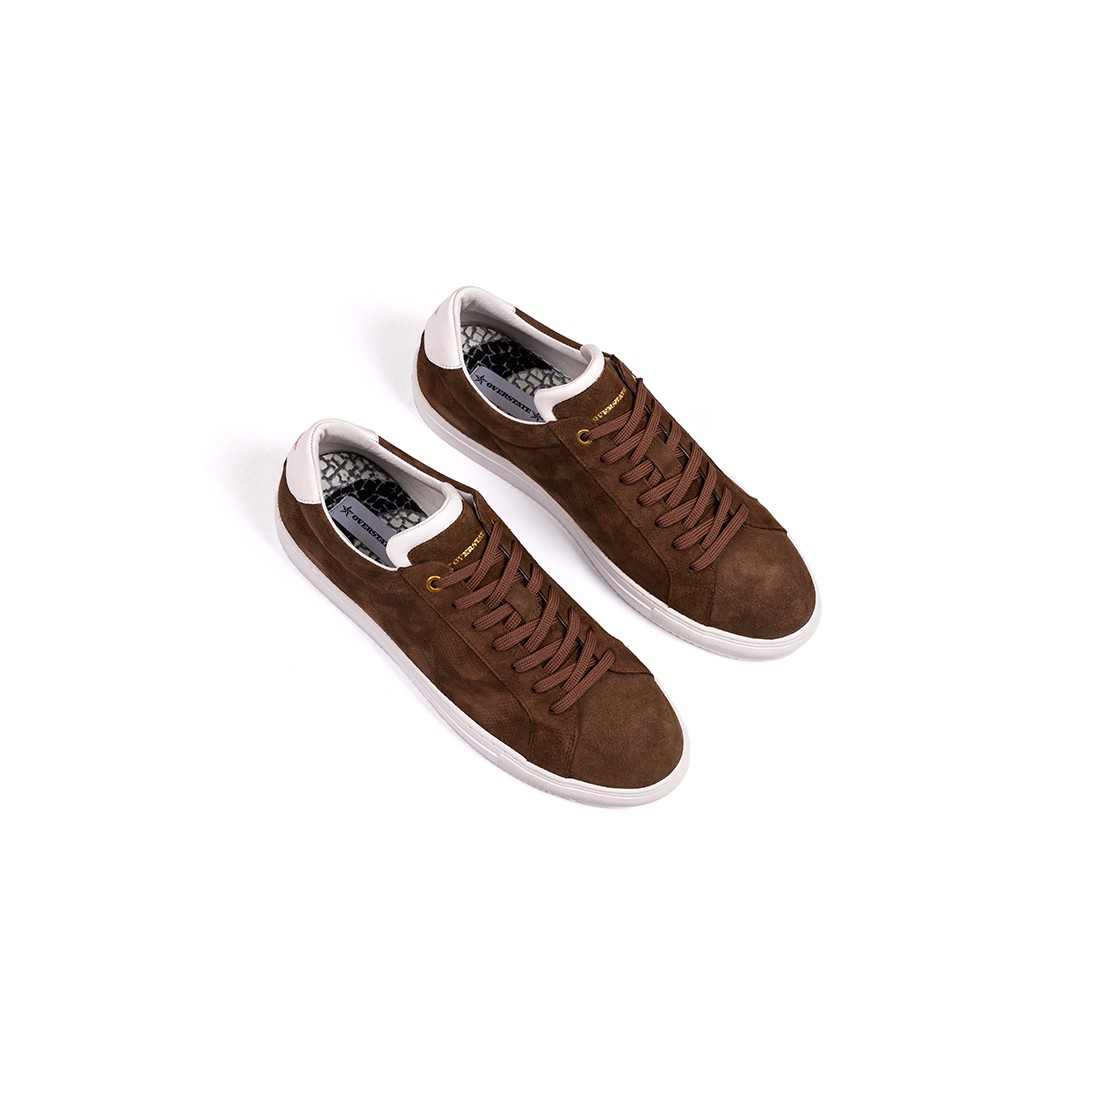 Tenis Casuales Lifestyle En Cuero Marca Overstate 8448a-1627ov Taupe 